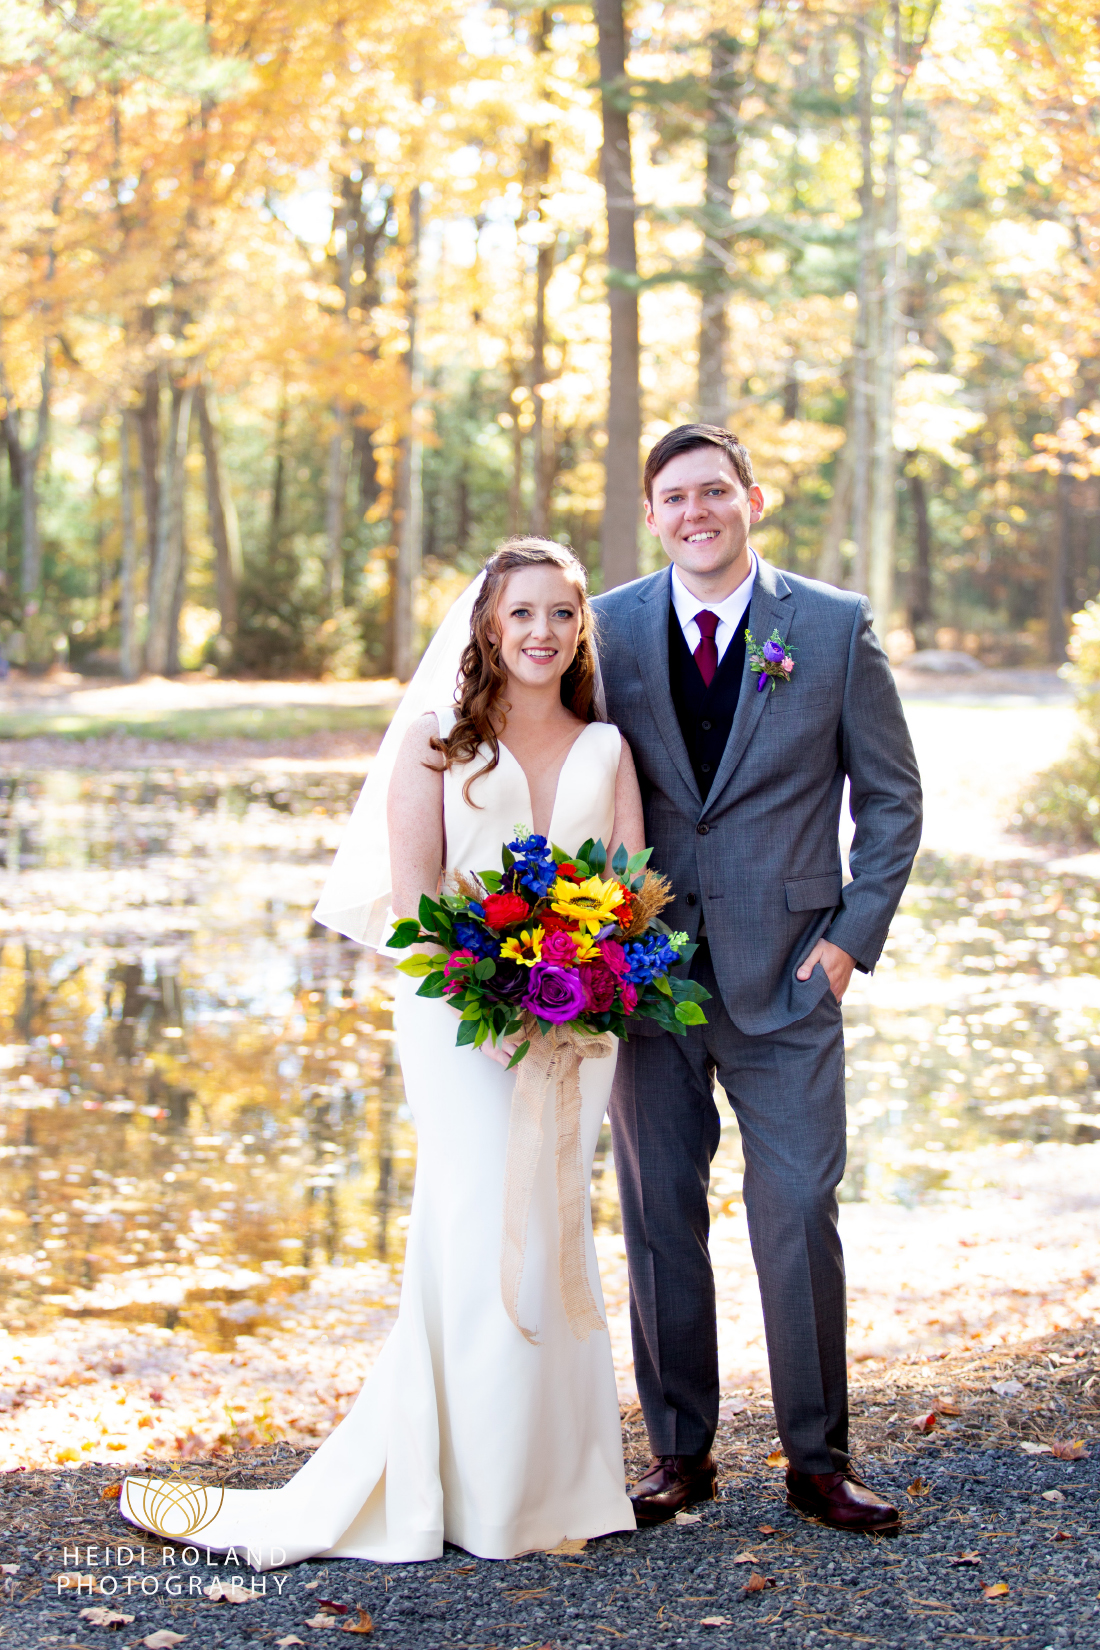 Bride holding bright floral bouquet standing with groom in the woods before fall wedding in Mount Pocono PA